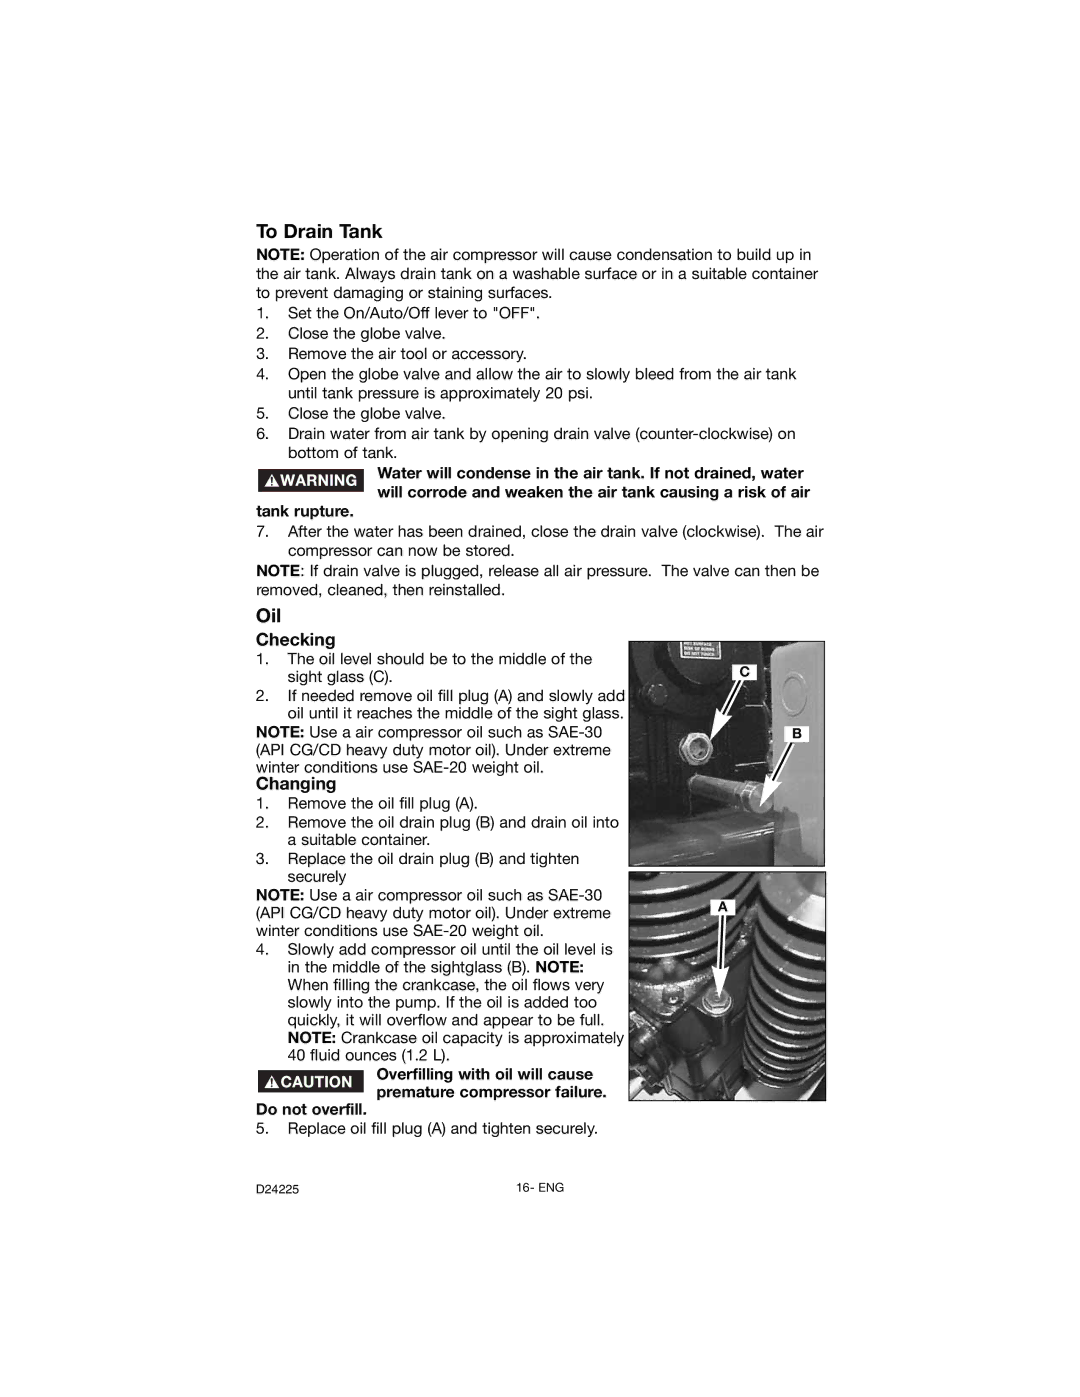 Porter-Cable D24225-049-2 instruction manual To Drain Tank, Oil, Checking, Changing 